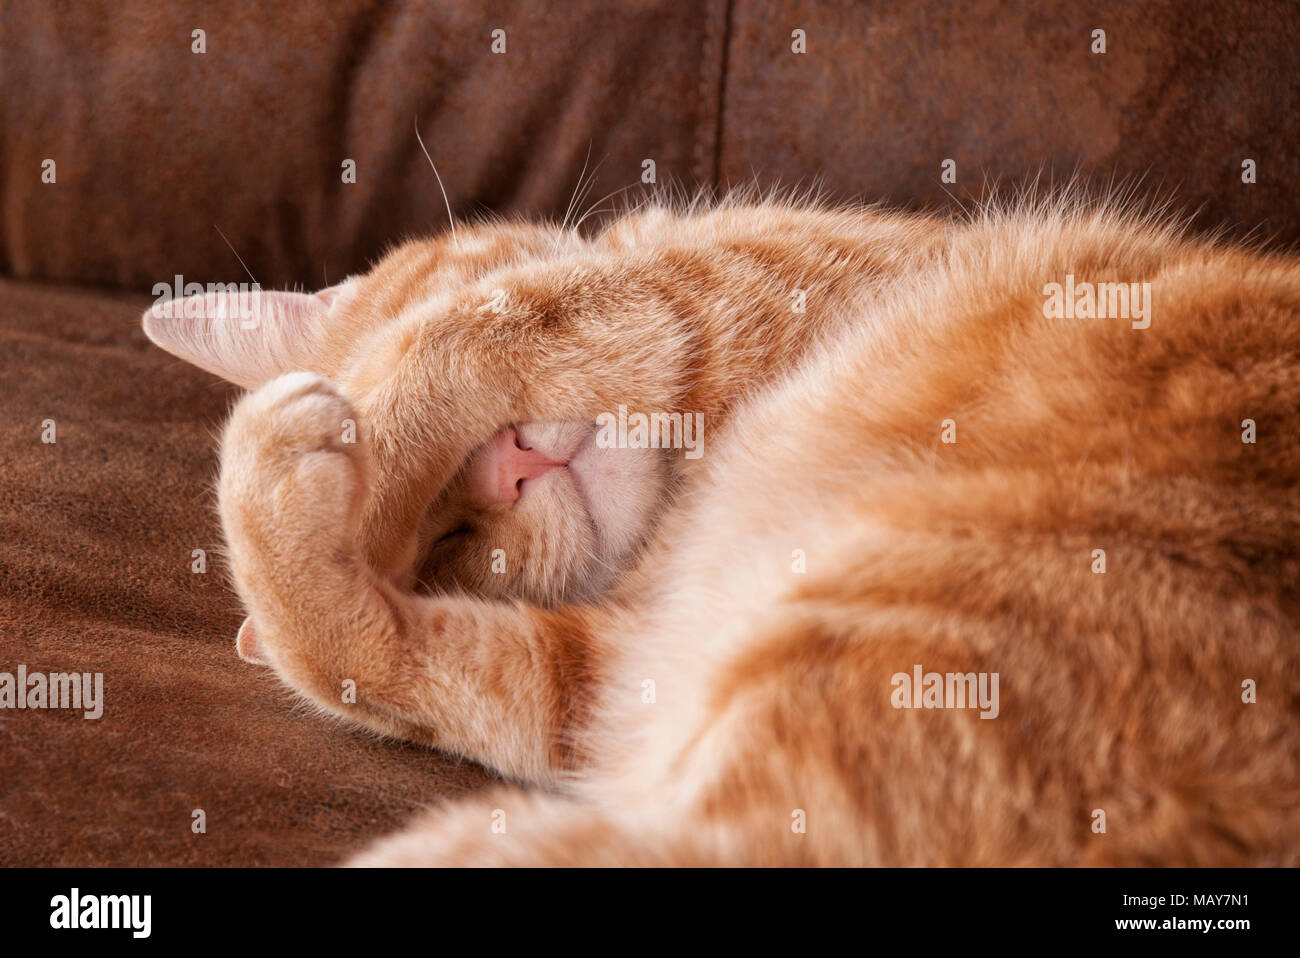 Ginger tabby cat asleep, with his paws covering his eyes Stock Photo